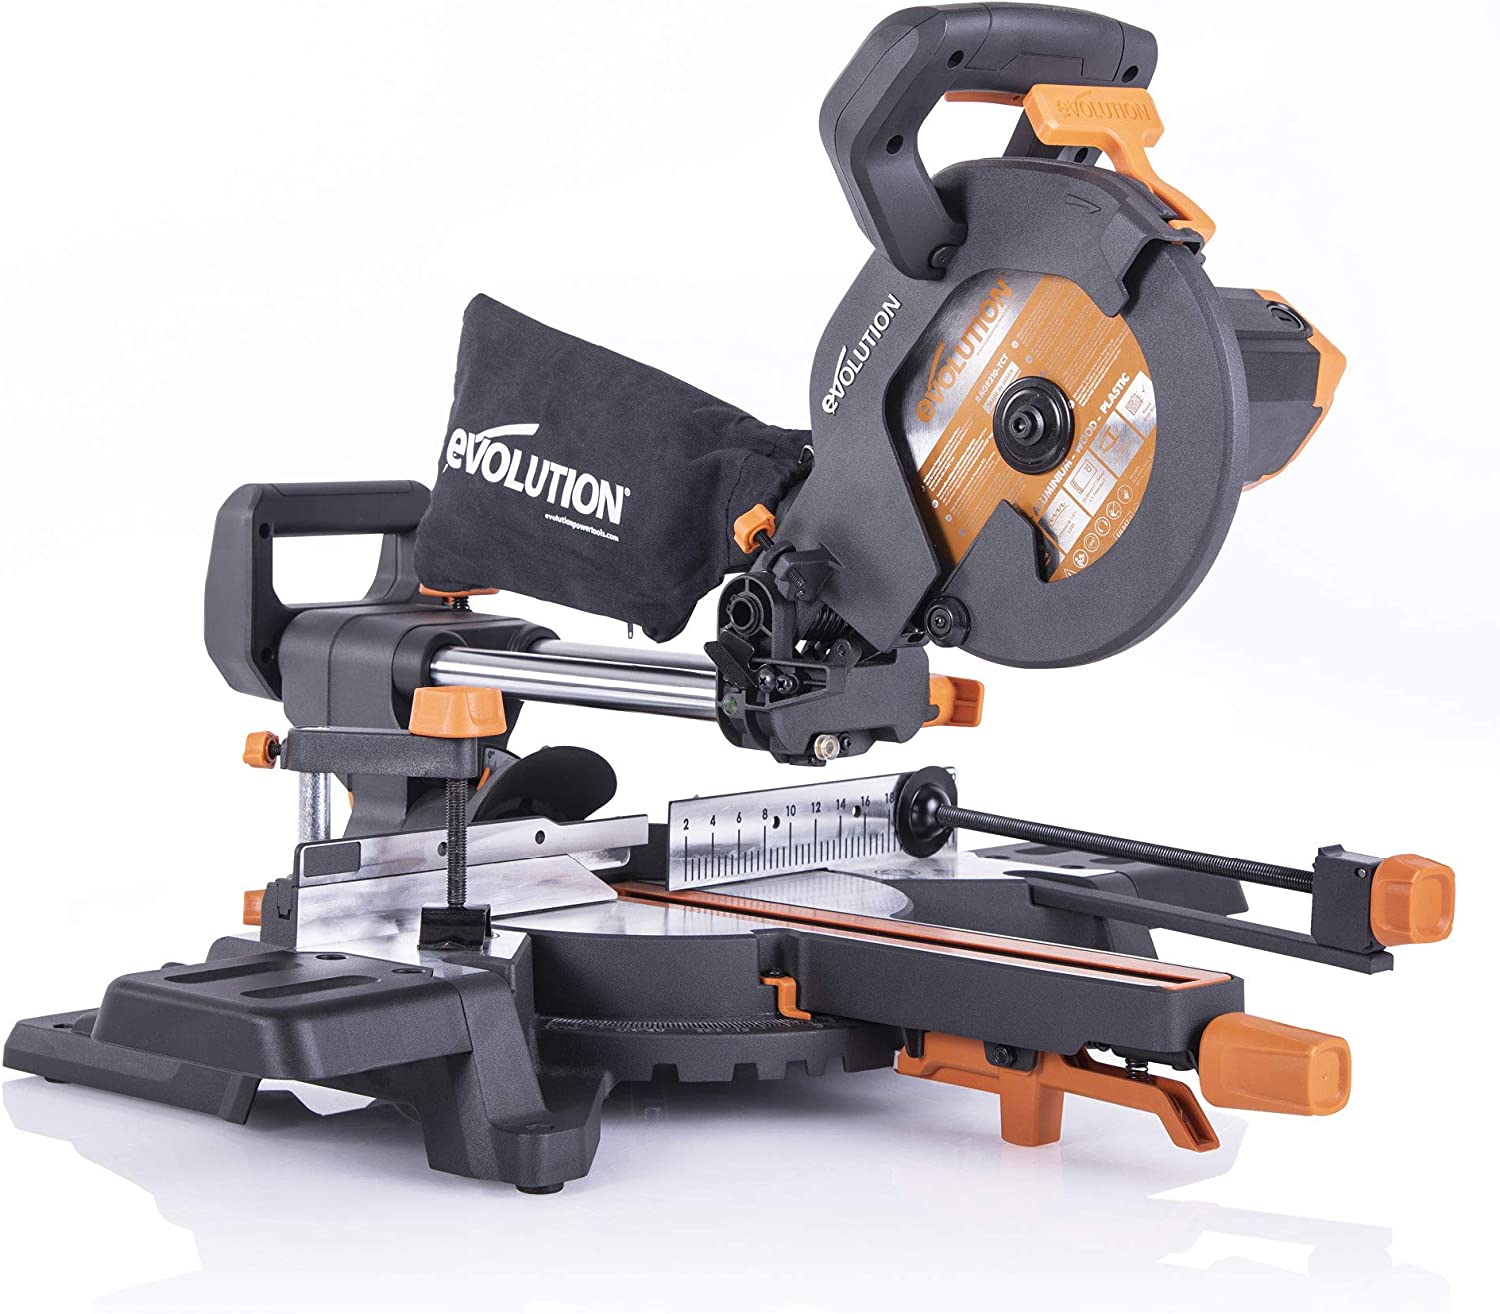 Evolution Power Tools R210SMS-300+ Sliding Mitre Saw with Multi-Material Cutting, 45 Degree Bevel, 50 Degree Mitre, 300 mm Slide, 1500 W, 110 V (Industrial Plug)